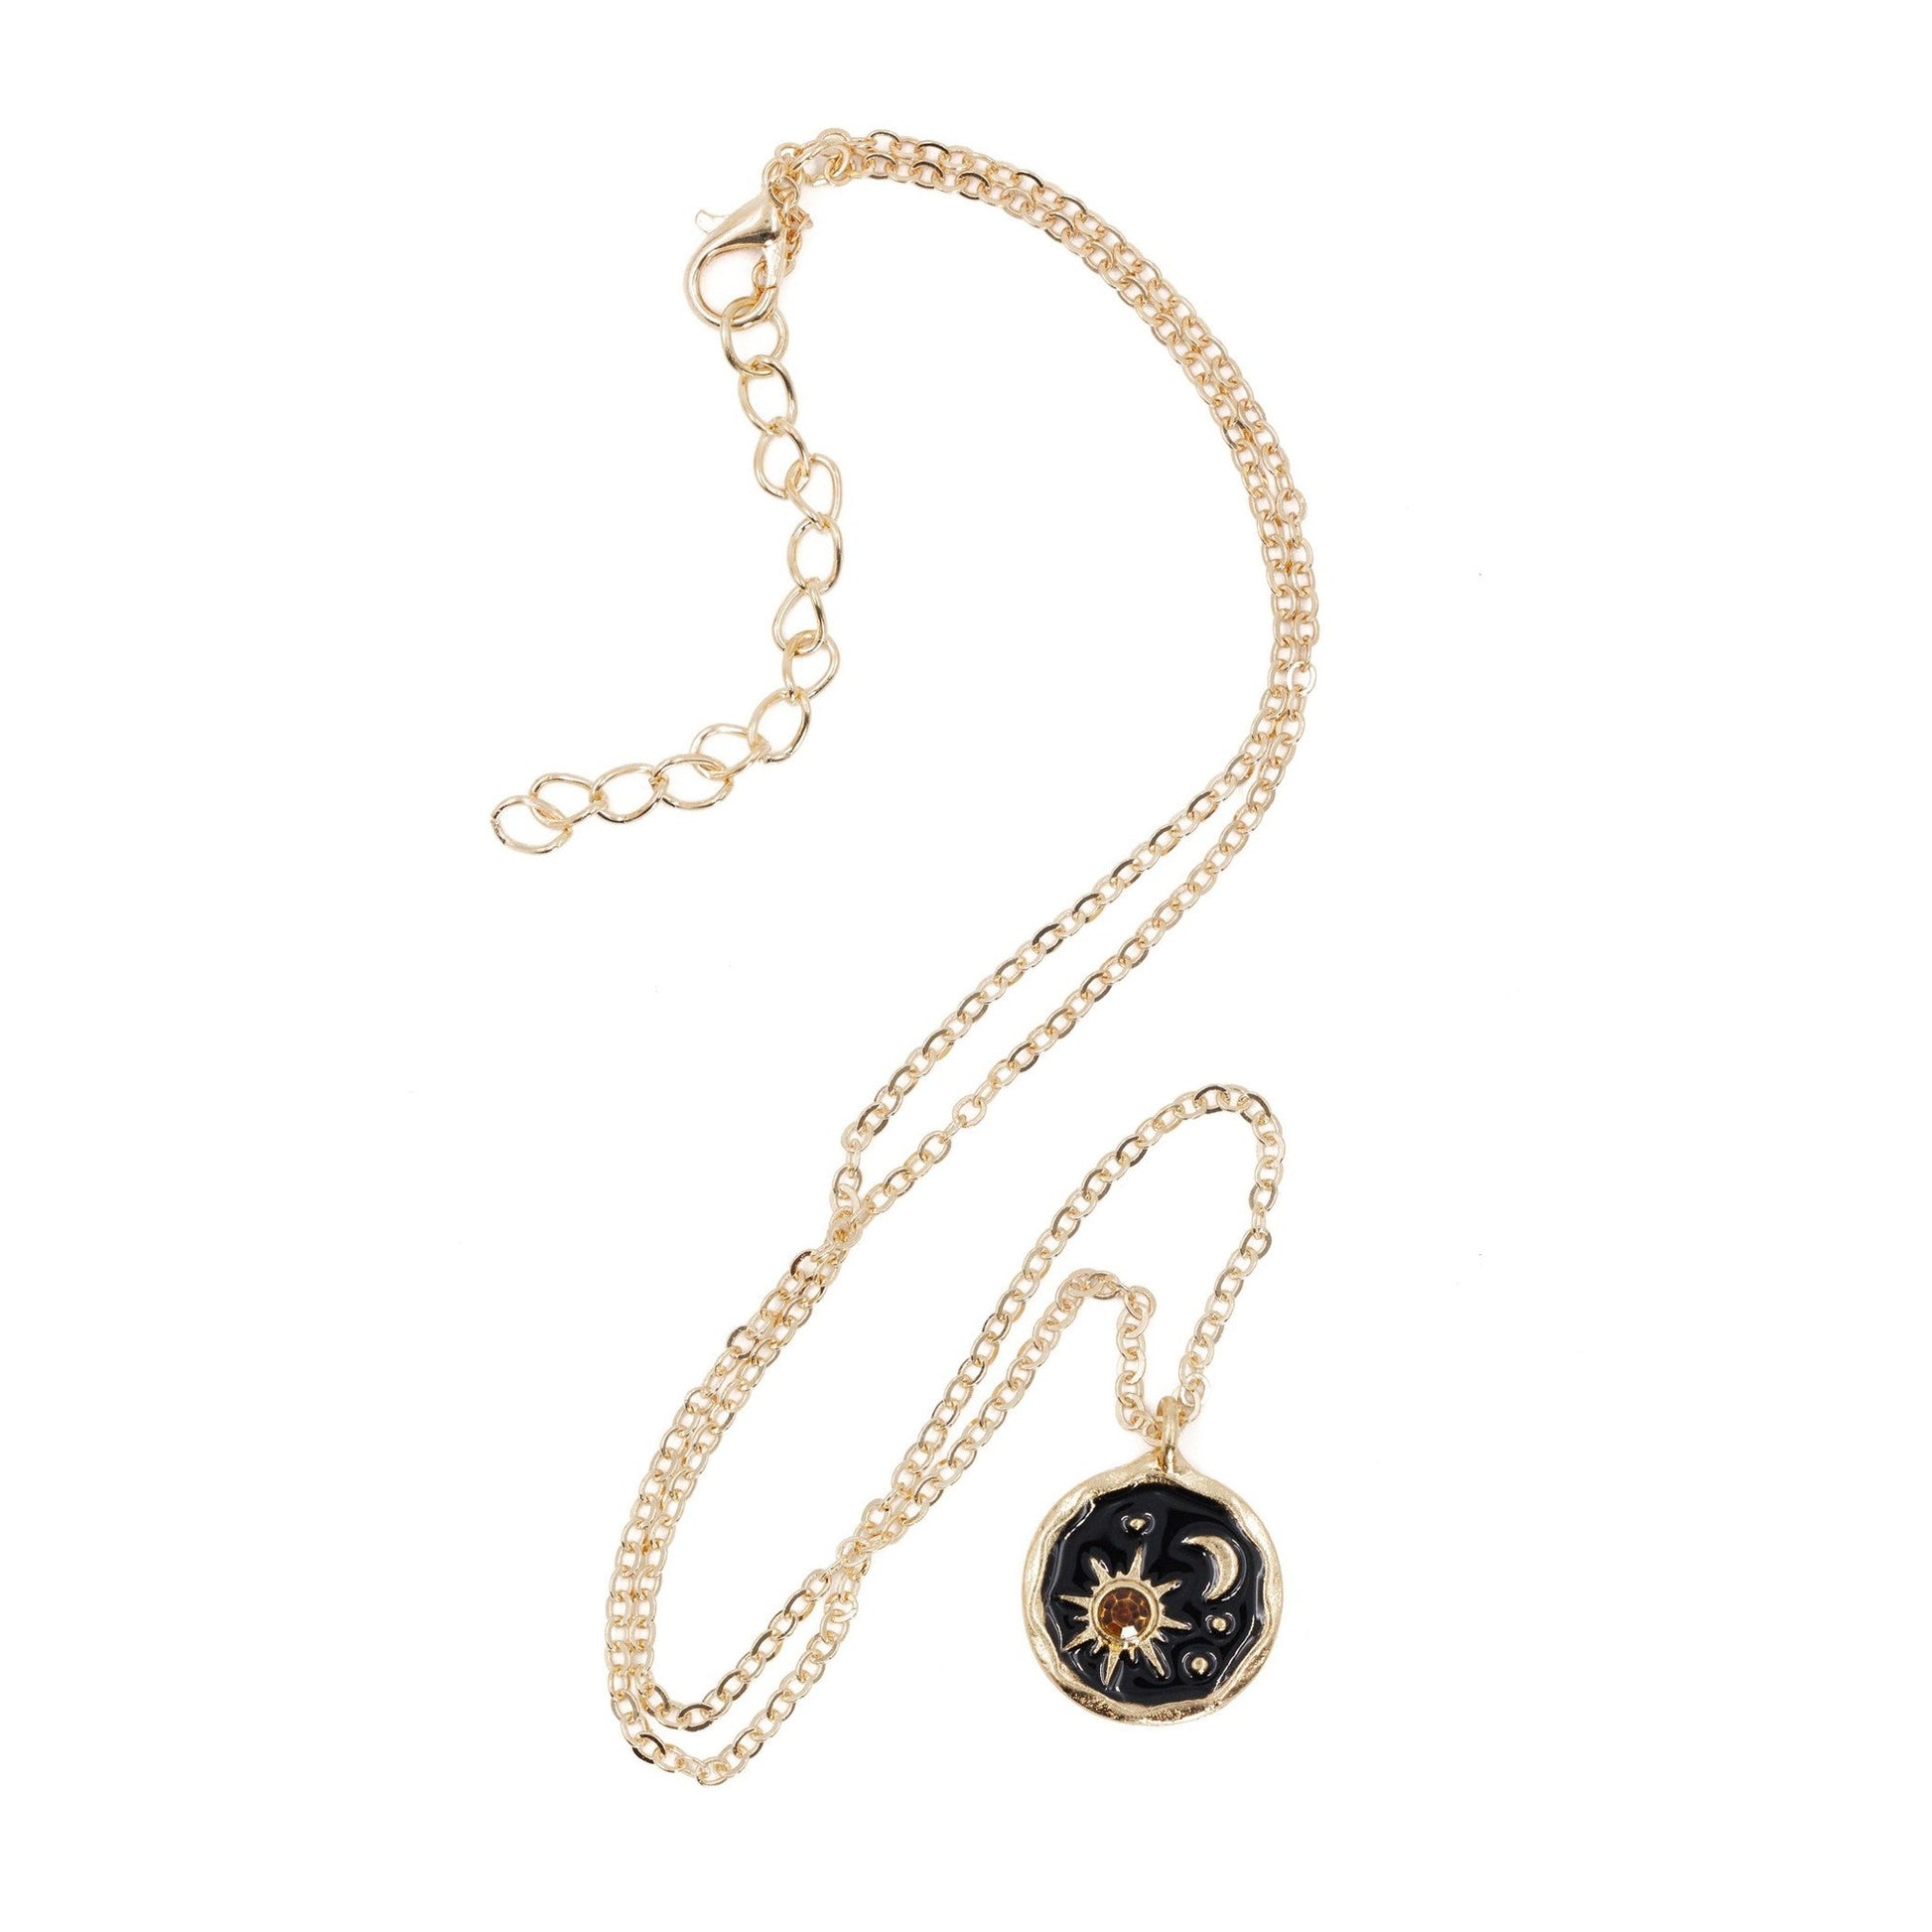 Sun and Moon Celestial Pendant Necklace in Black and Gold